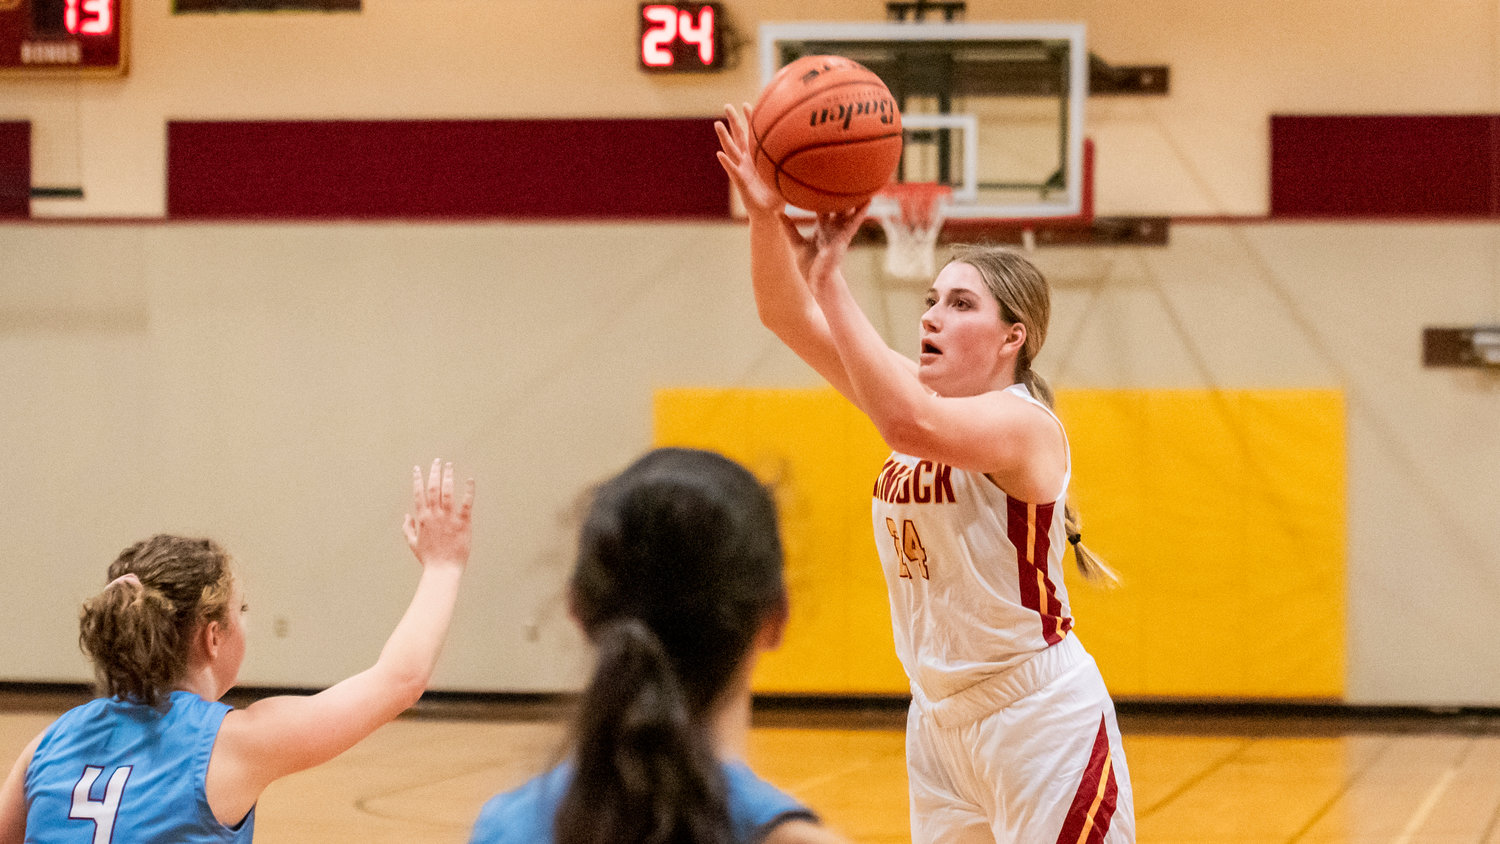 Winlock’s Addison Hall (24) makes a shot from deep during a game against the Stevenson Bulldogs Thursday night.